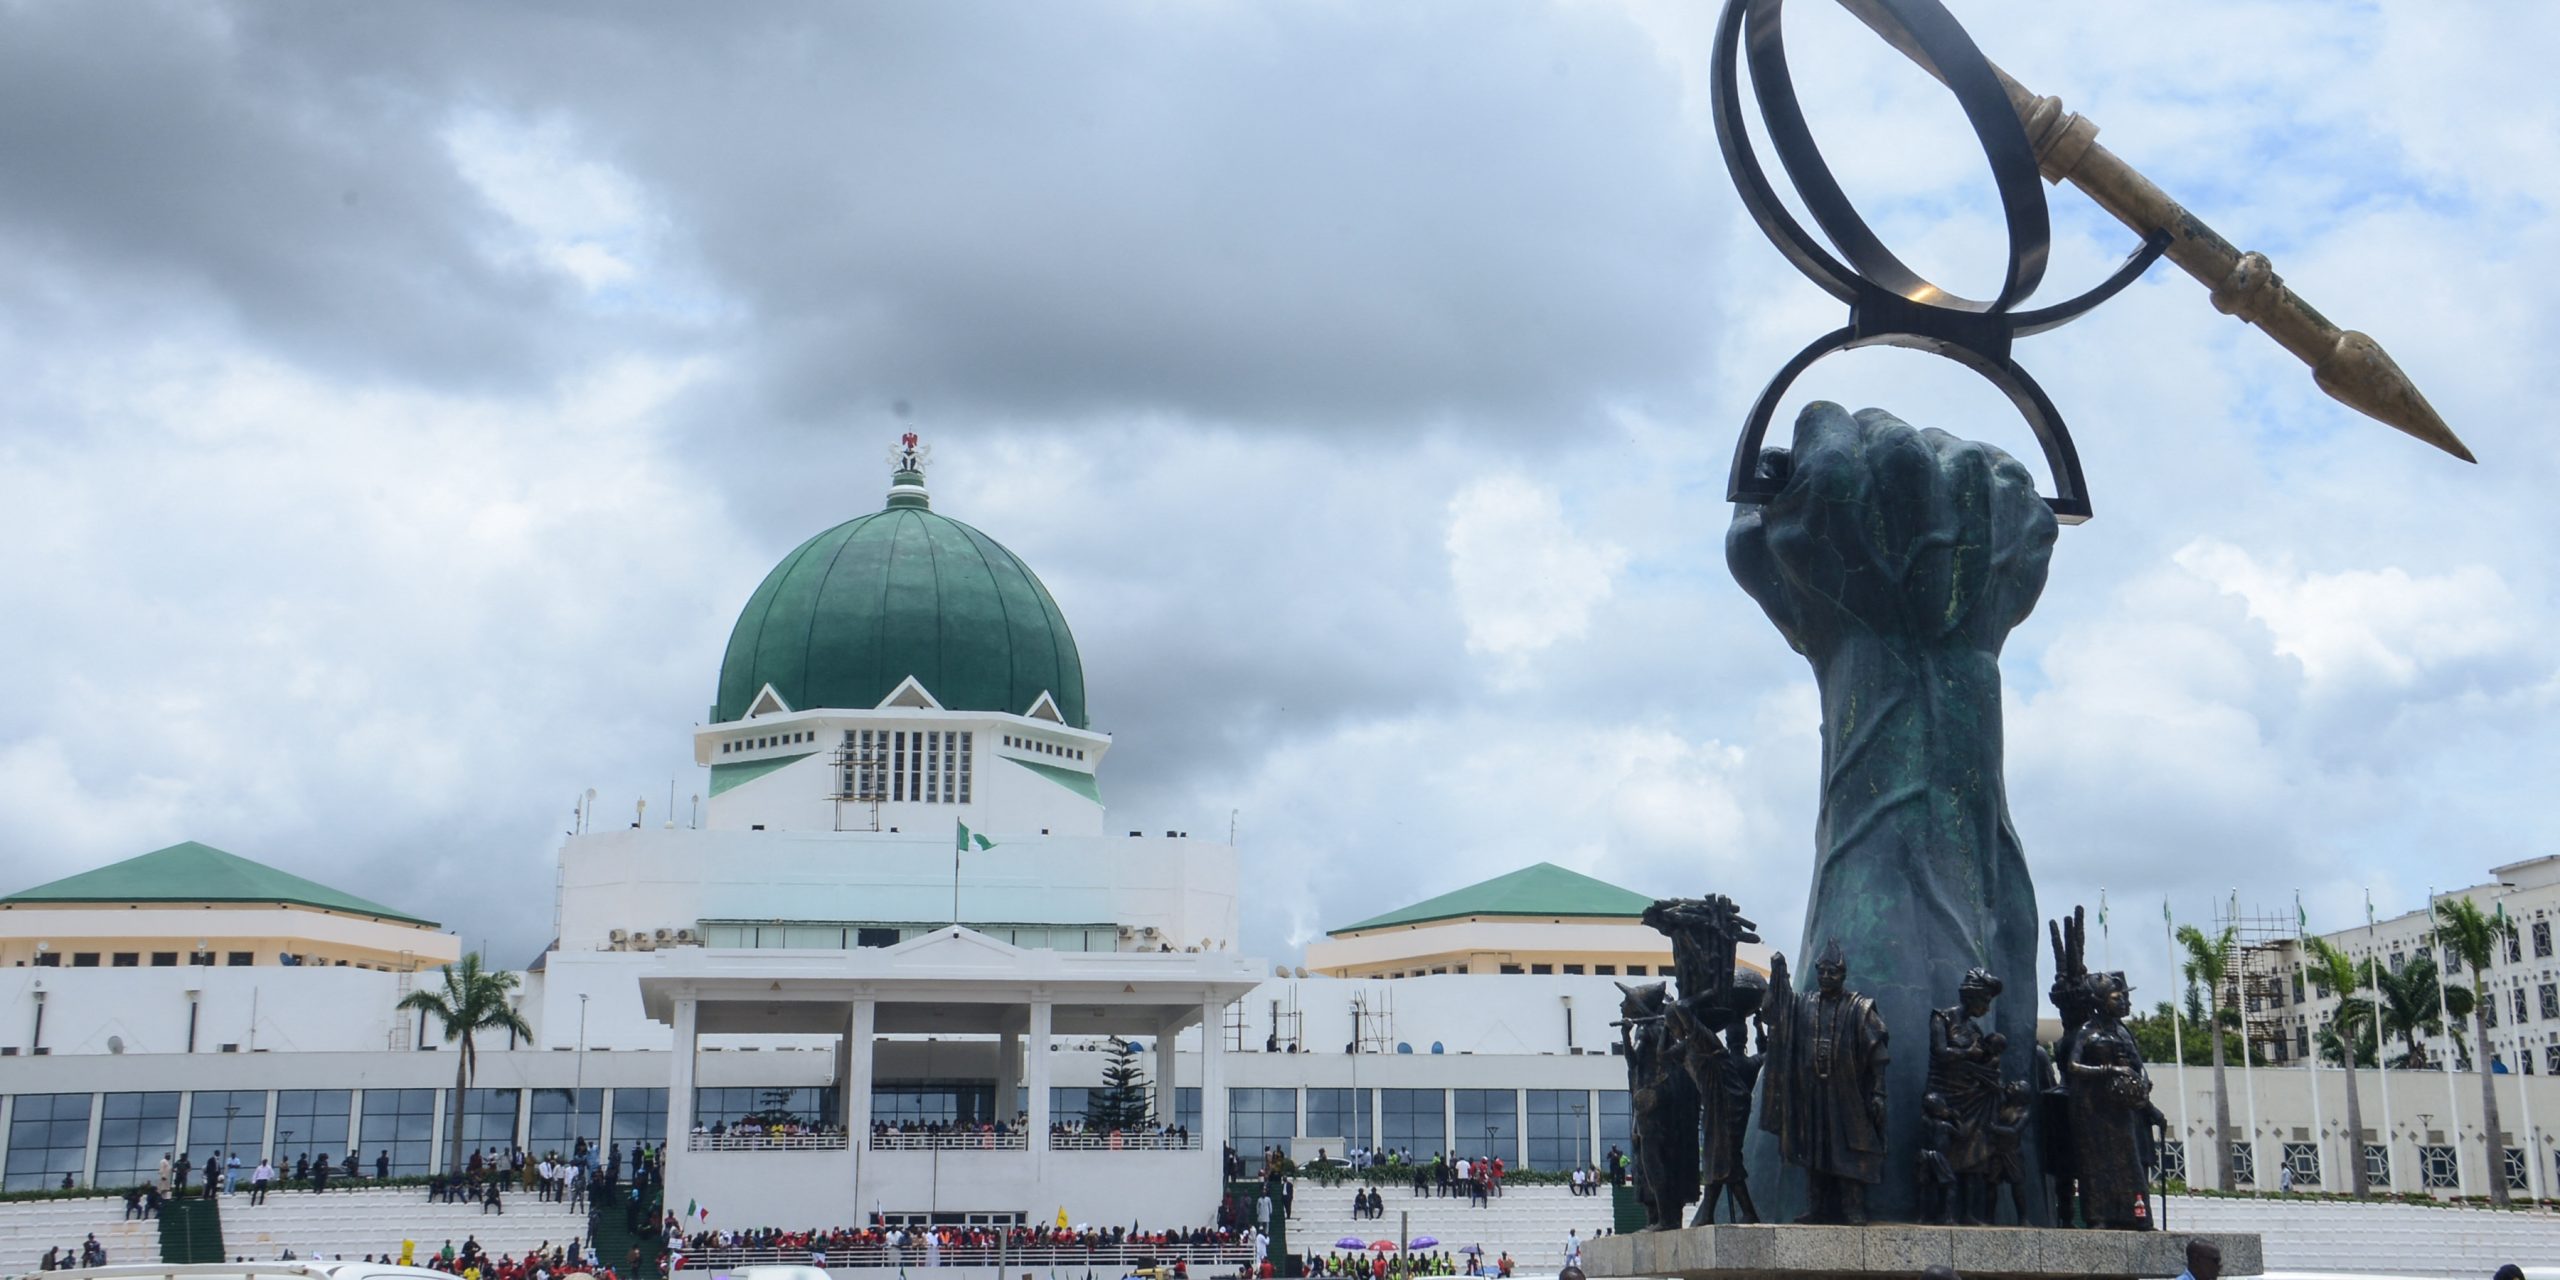 Sculpture of a powerful forearm holding a mace in front of the National Assembly of the Federal Republic of Nigeria symbolizes the authority of the legislature on behalf of the people.